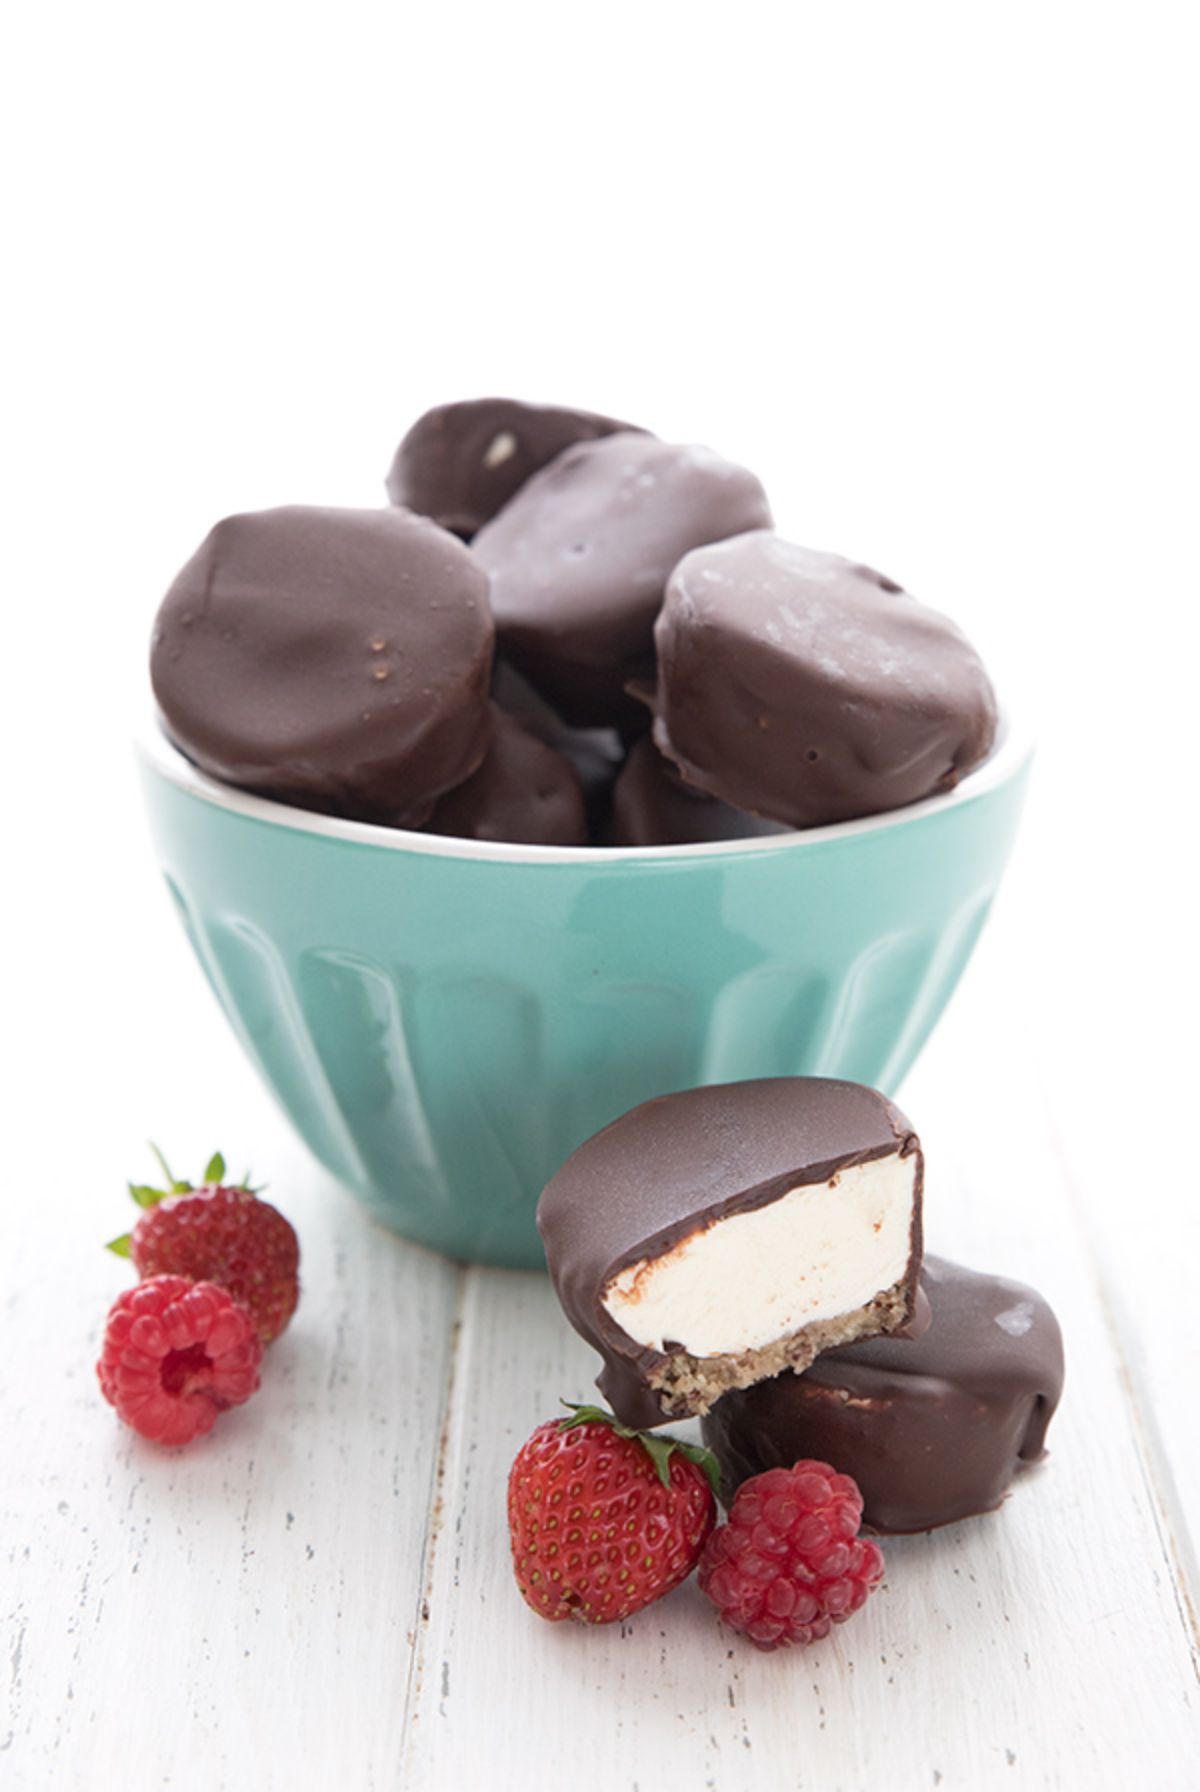 A ligth green bowl hold a pile of chocolate covered cheesecake bites. In front are 2 of the bites and a pile of raspberries